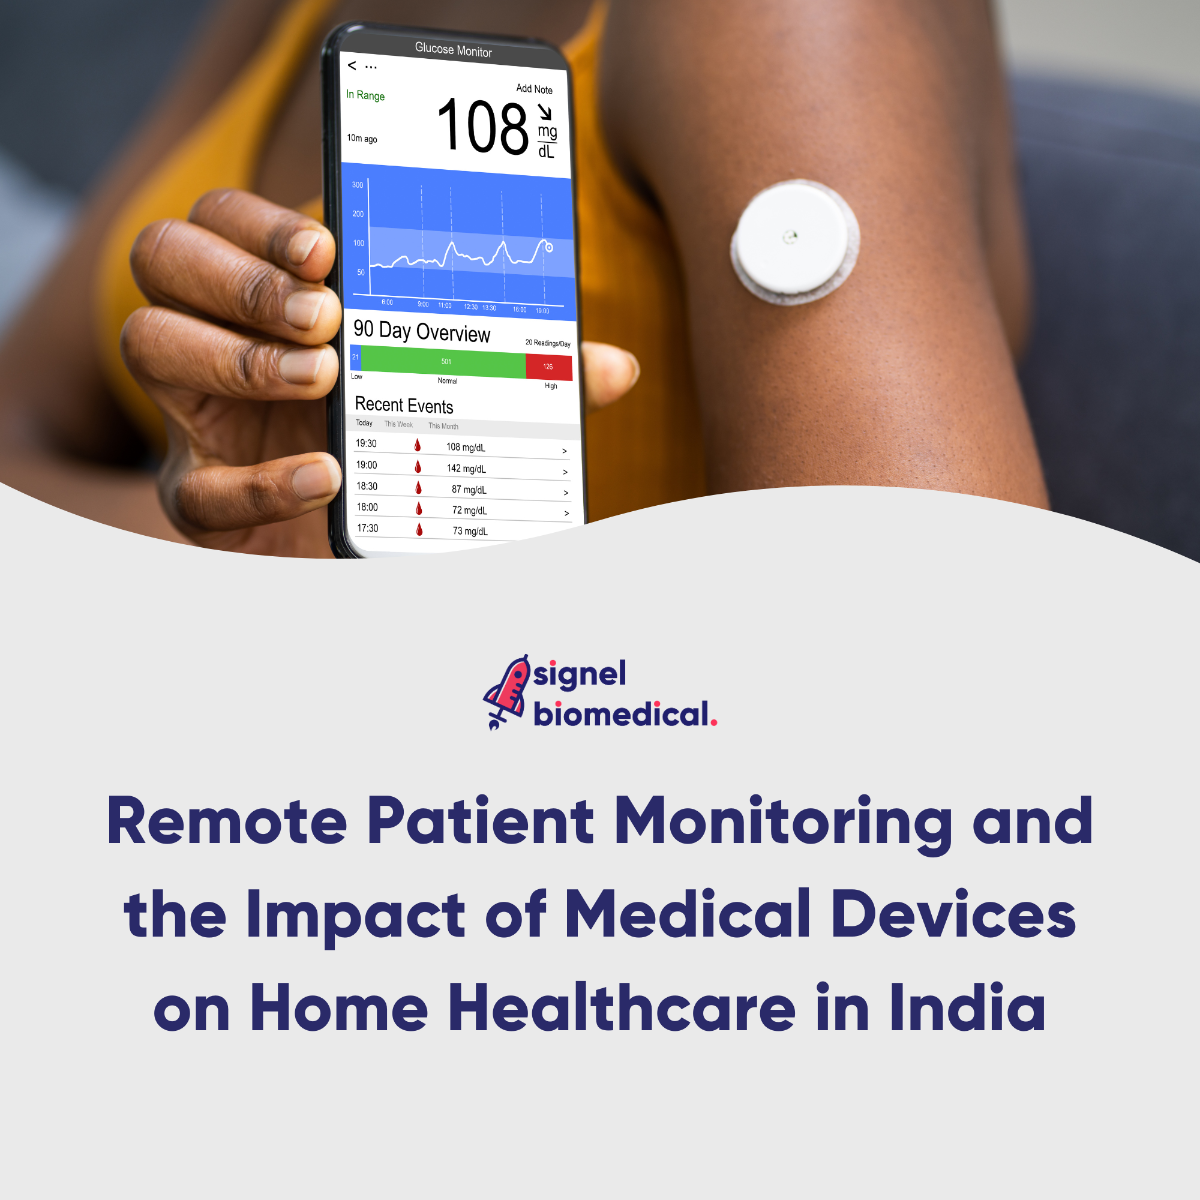 Remote Patient Monitoring and the Impact of Medical Devices